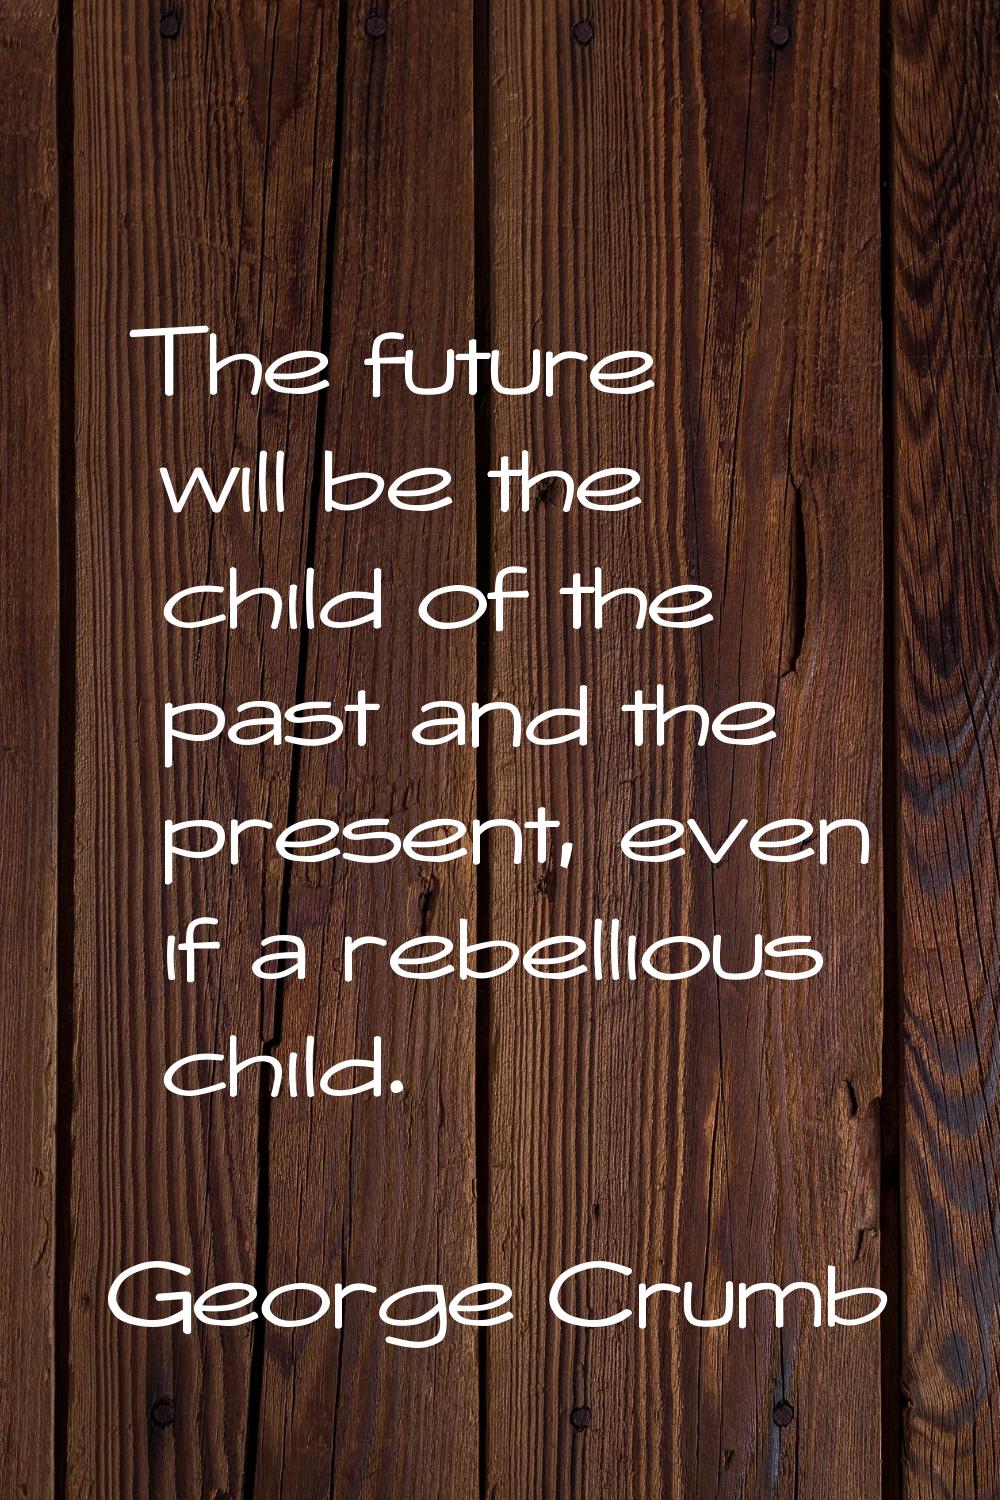 The future will be the child of the past and the present, even if a rebellious child.